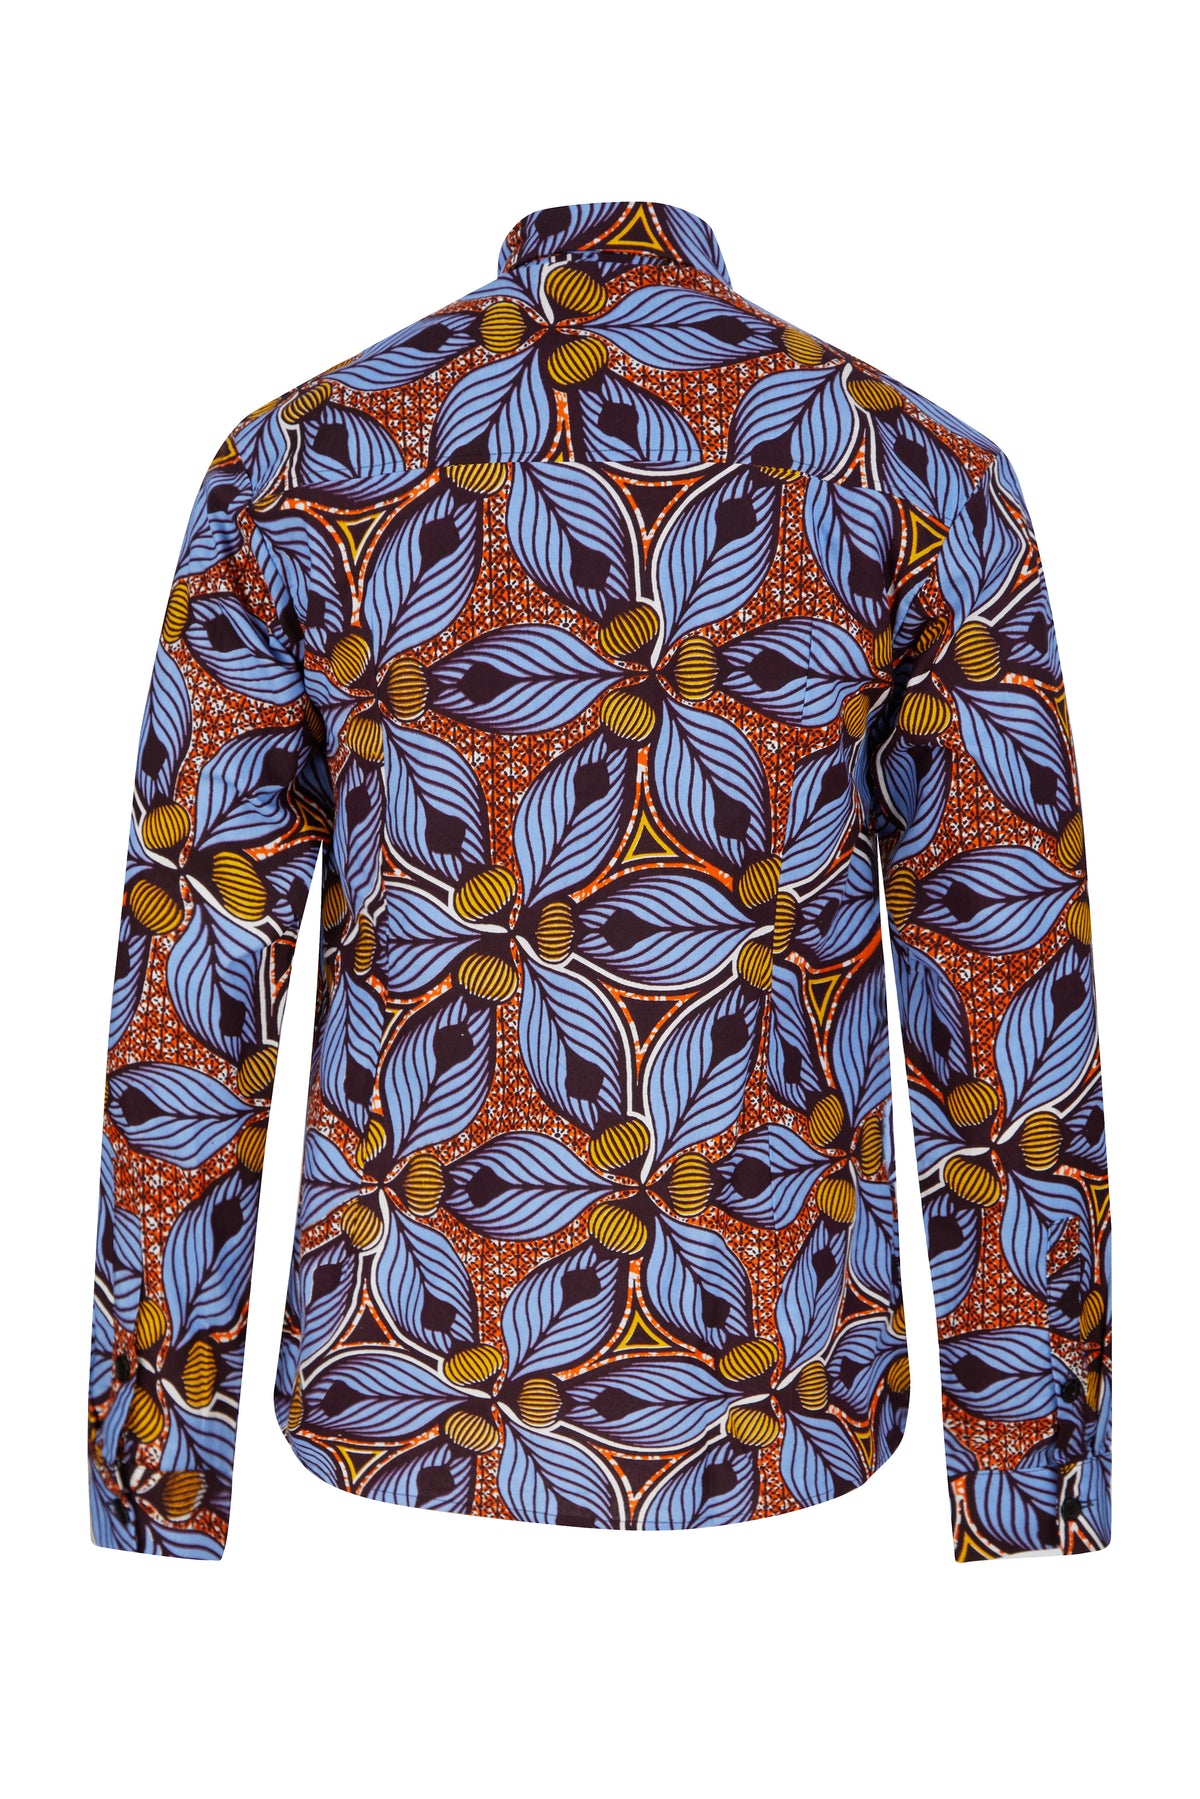 Long sleeve Tiger Lily African print shirt - OHEMA OHENE AFRICAN INSPIRED FASHION